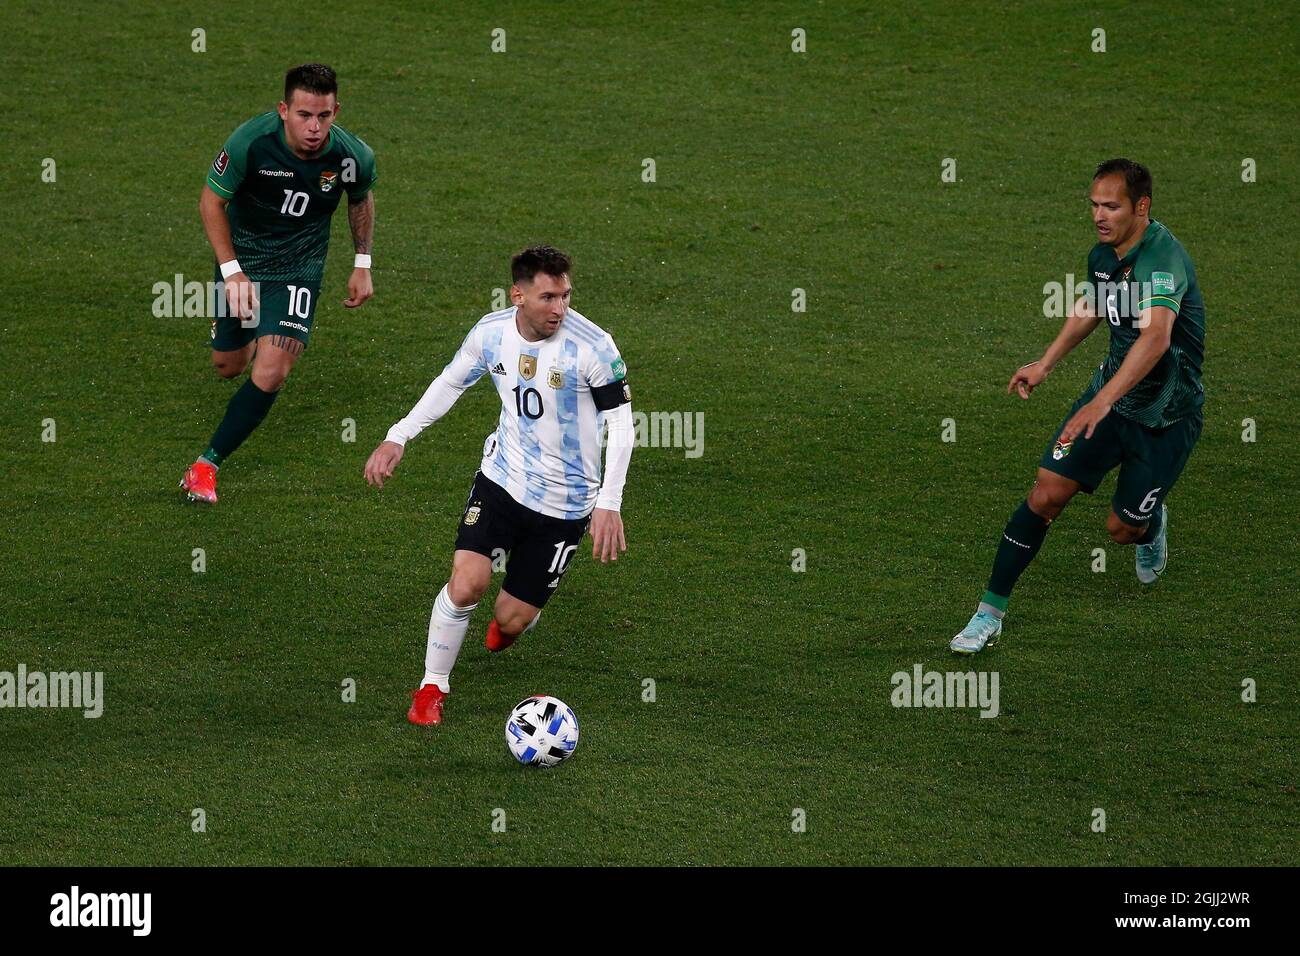 Buenos Aires, Argentina. 09th Sep, 2021. BUENOS AIRES - SEPTEMBER 9: Forward Lionel Messi (10) of Argentina fights for the ball with forward Henry Vaca (10) and defender Leon el Justiniano (6) of Bolivia during a match between Argentina and Bolivia as part of South American Qualifiers for Qatar 2022 at Estadio Monumental Antonio Vespucio Liberti on September 9, 2021 in Buenos Aires, Argentina. (Photo by Florencia Tan Jun/PxImages) Credit: Px Images/Alamy Live News Stock Photo